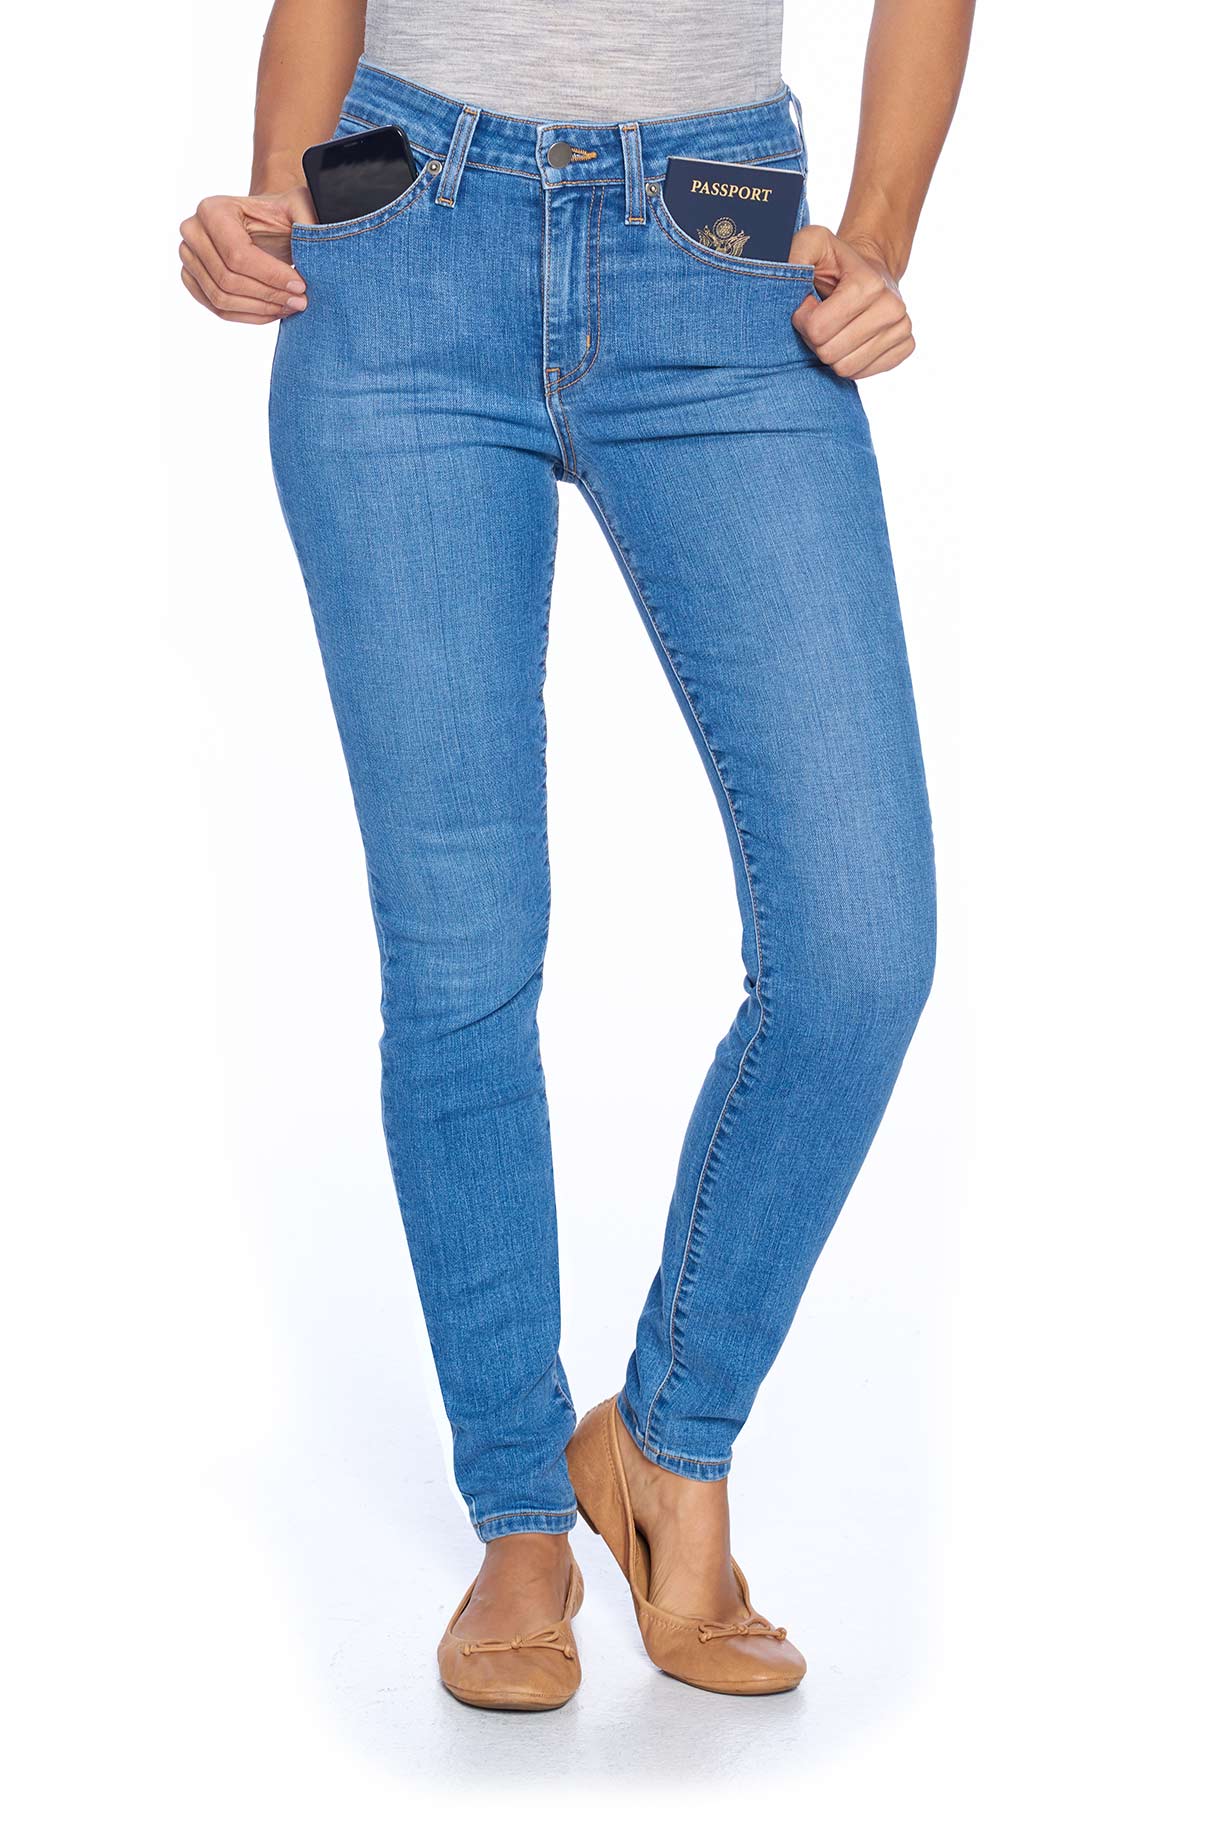 Women's travel jeans in faded indigo comfort skinny style